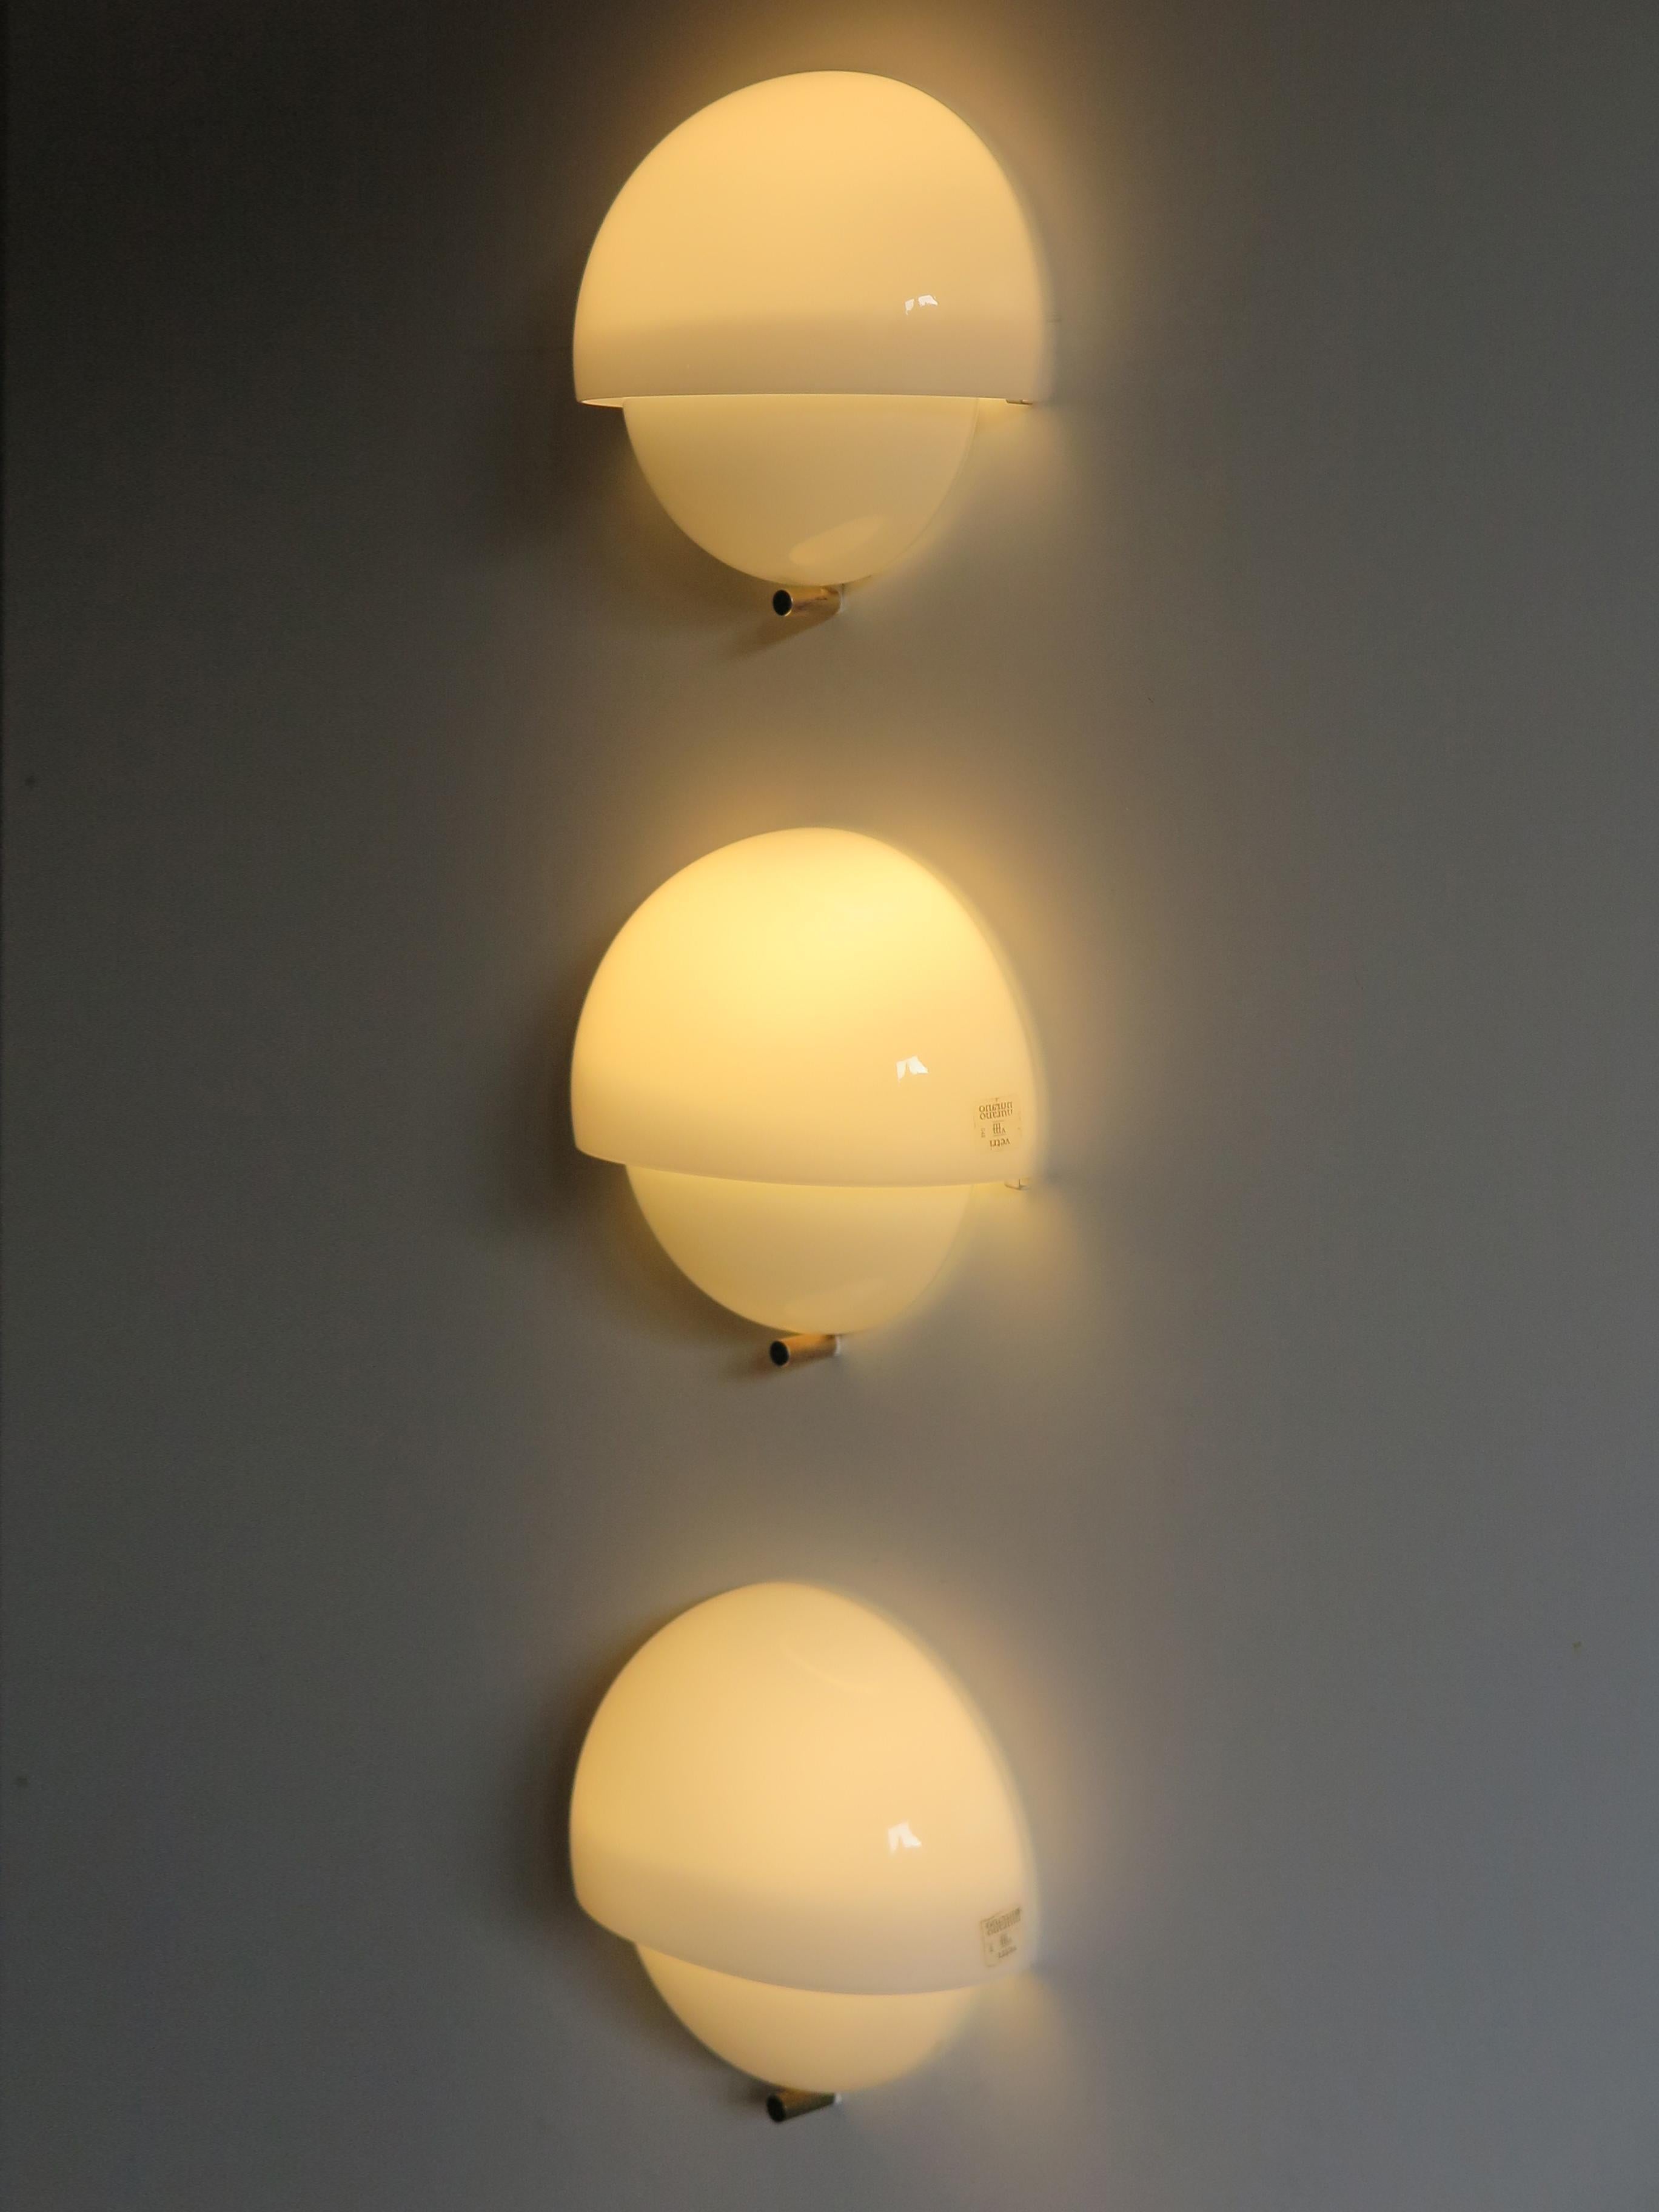 Set of three Italian sconces or wall lamps model Mania designed by italian designer Vico Magistretti for Artemide in 1963 with Murano white glasses, 1960s 
XIII Triennale.
Excellent vintage condition.